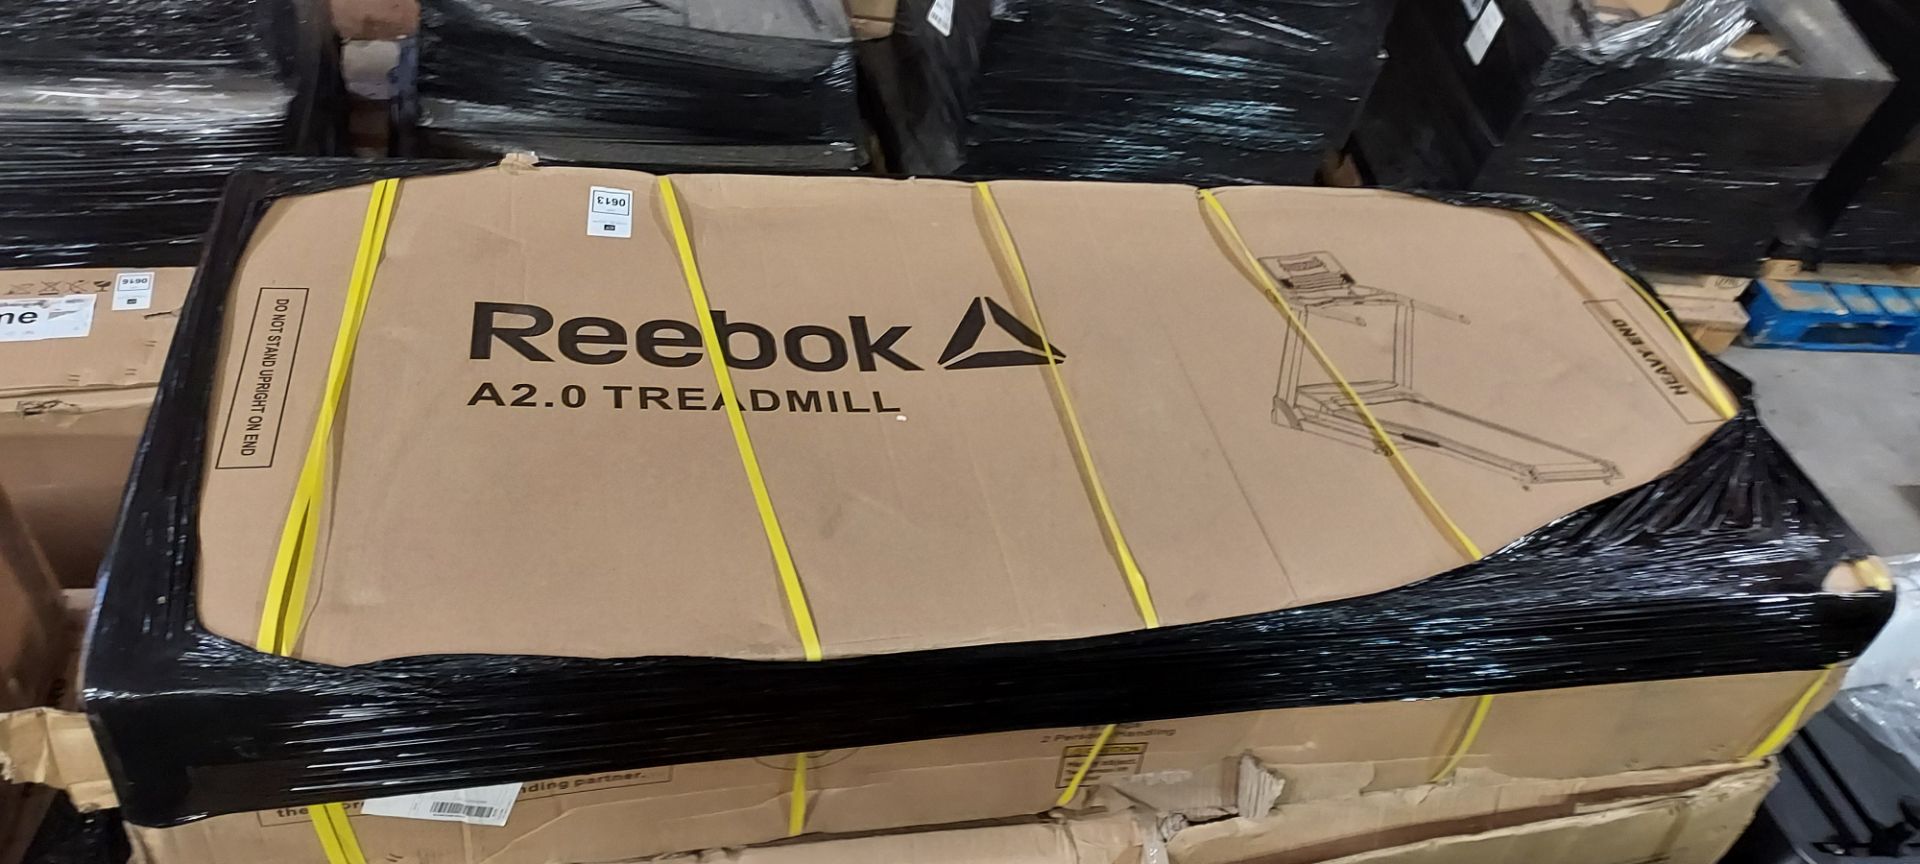 1 X BRAND NEW FACTORY SEALED REEBOK A2 TREADMILL 00 IN SILVER GROSS WEIGHT 60KG (NOTE BOX SLIGHTLY - Image 2 of 2